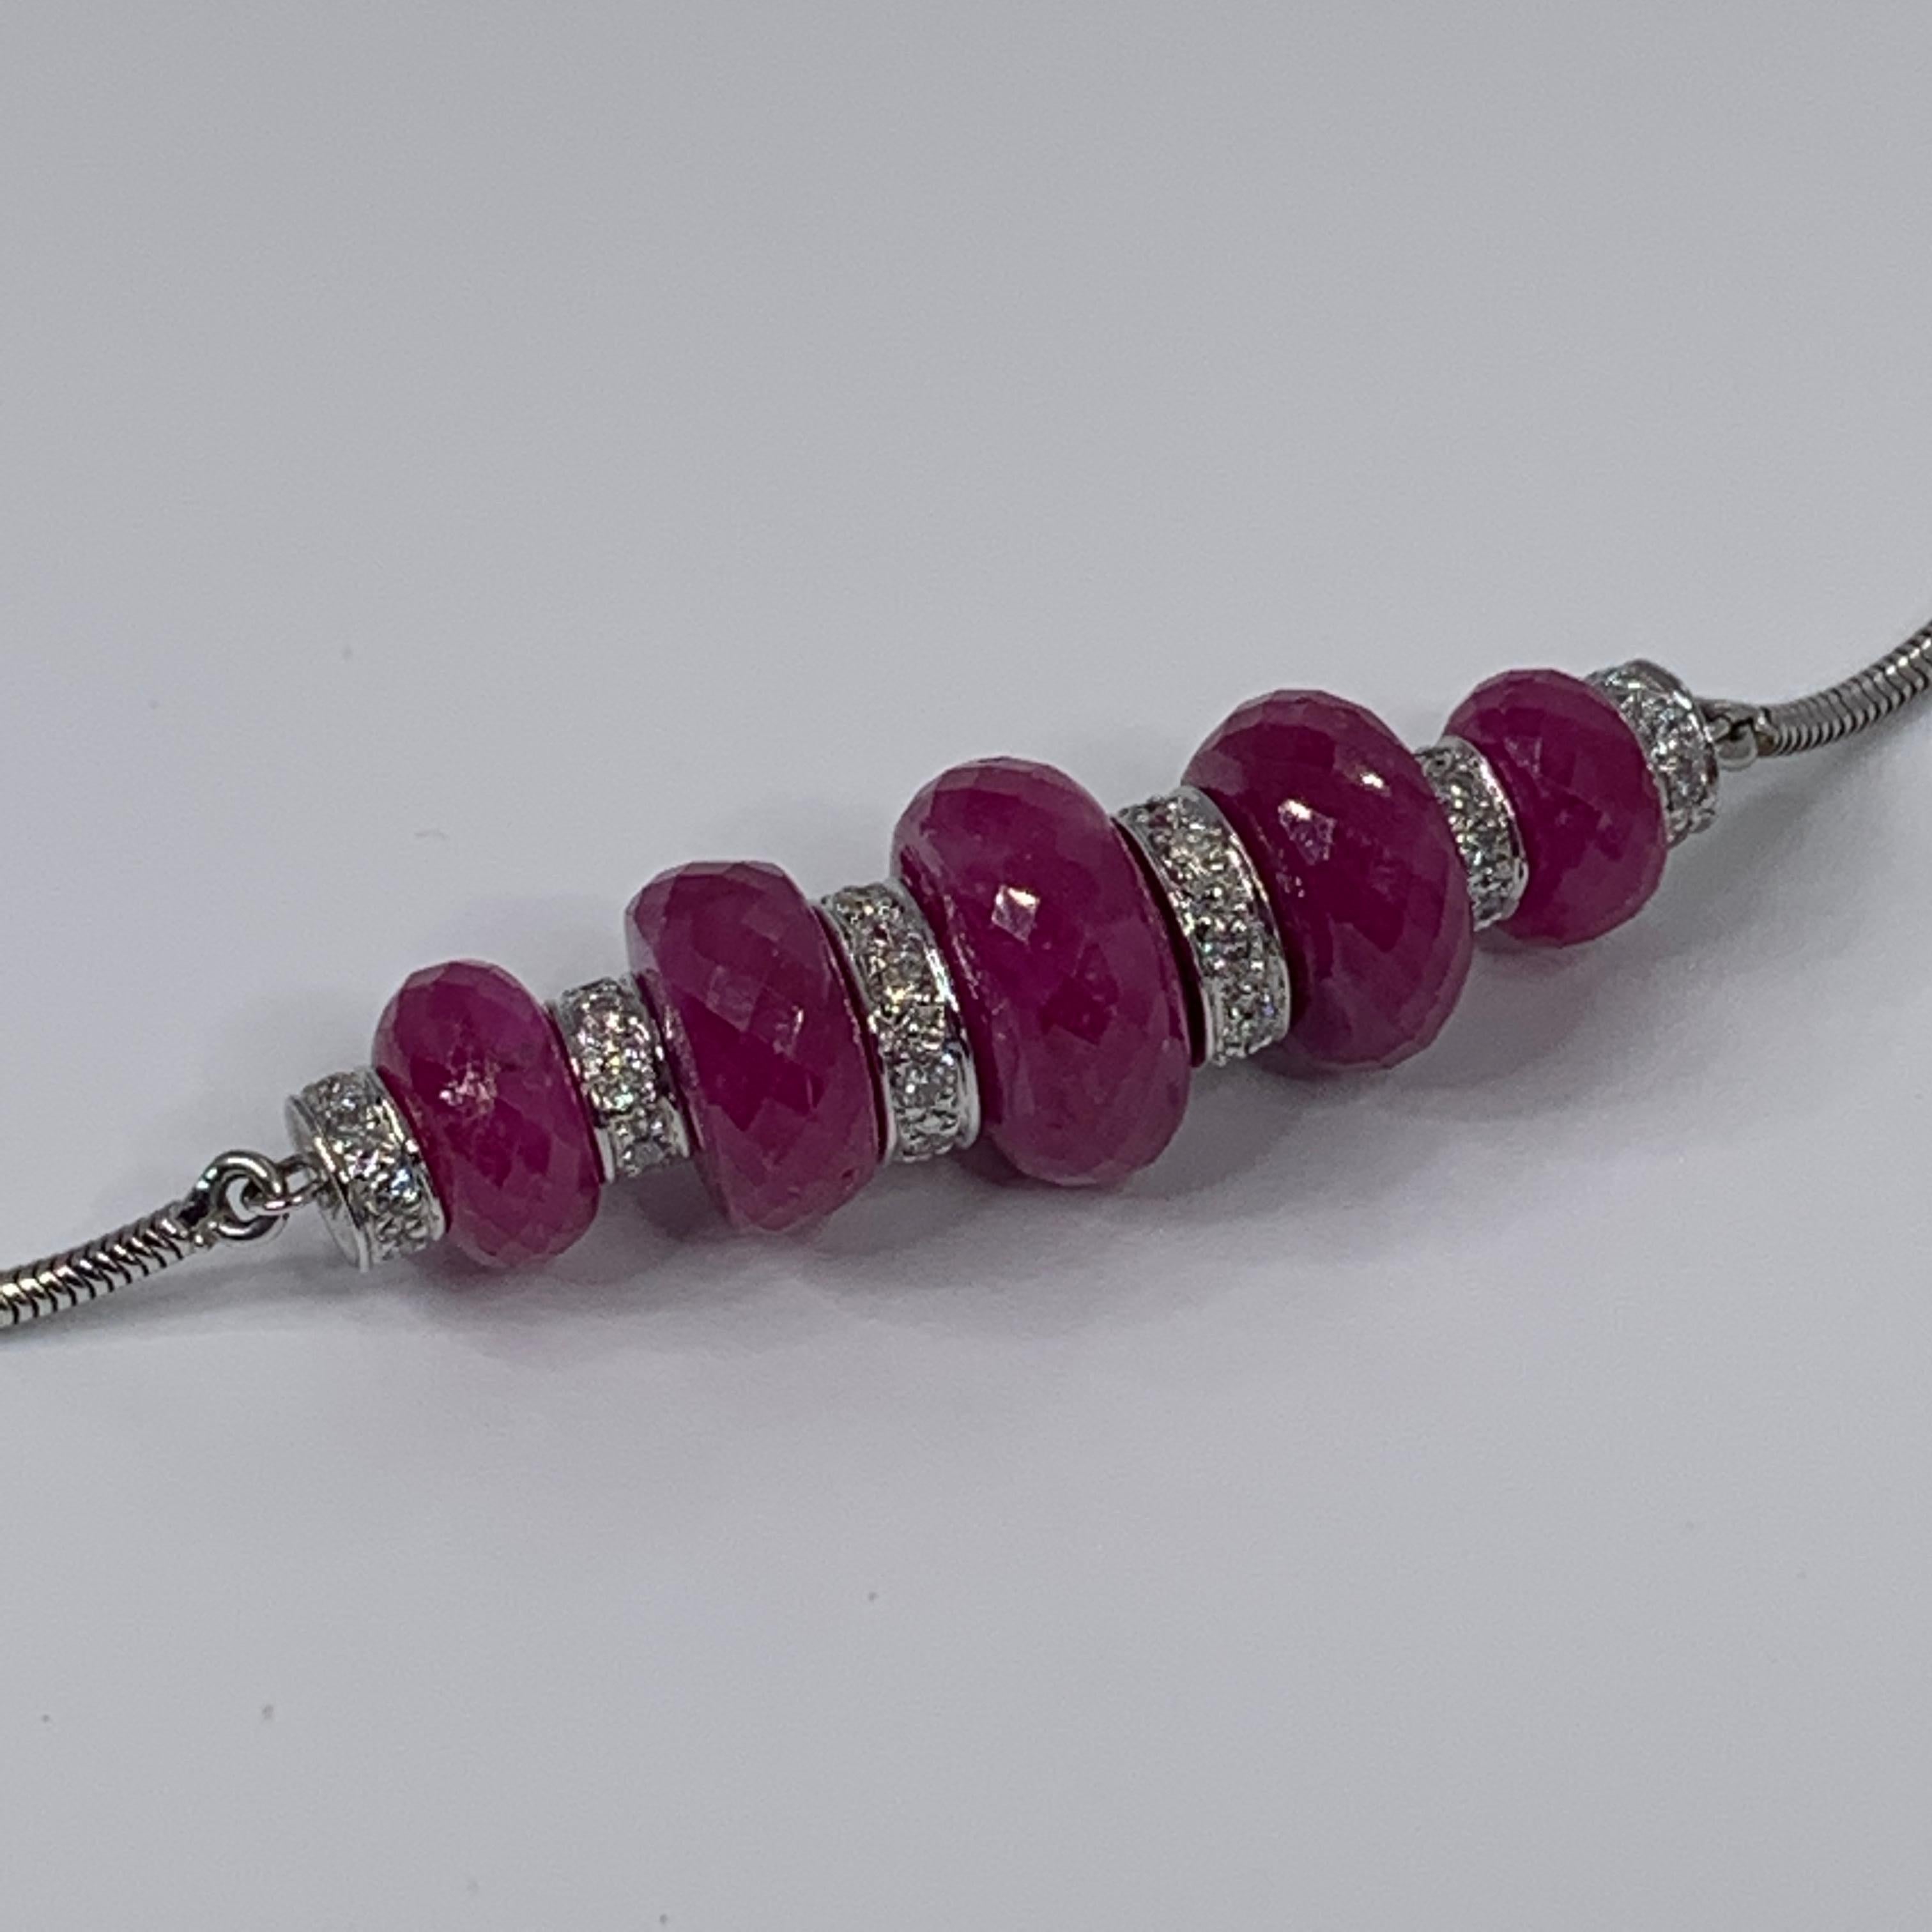 Handcrafted in Paris in the Maison Édéenne High Jewelry workshop, this pendant is in 18K white gold and set with 5 pearls of Ruby Root totaling 29.33 carat and white diamonds totaling 0.65 carat. It hangs on a 45 cm / 17 inches chain in the same 18K